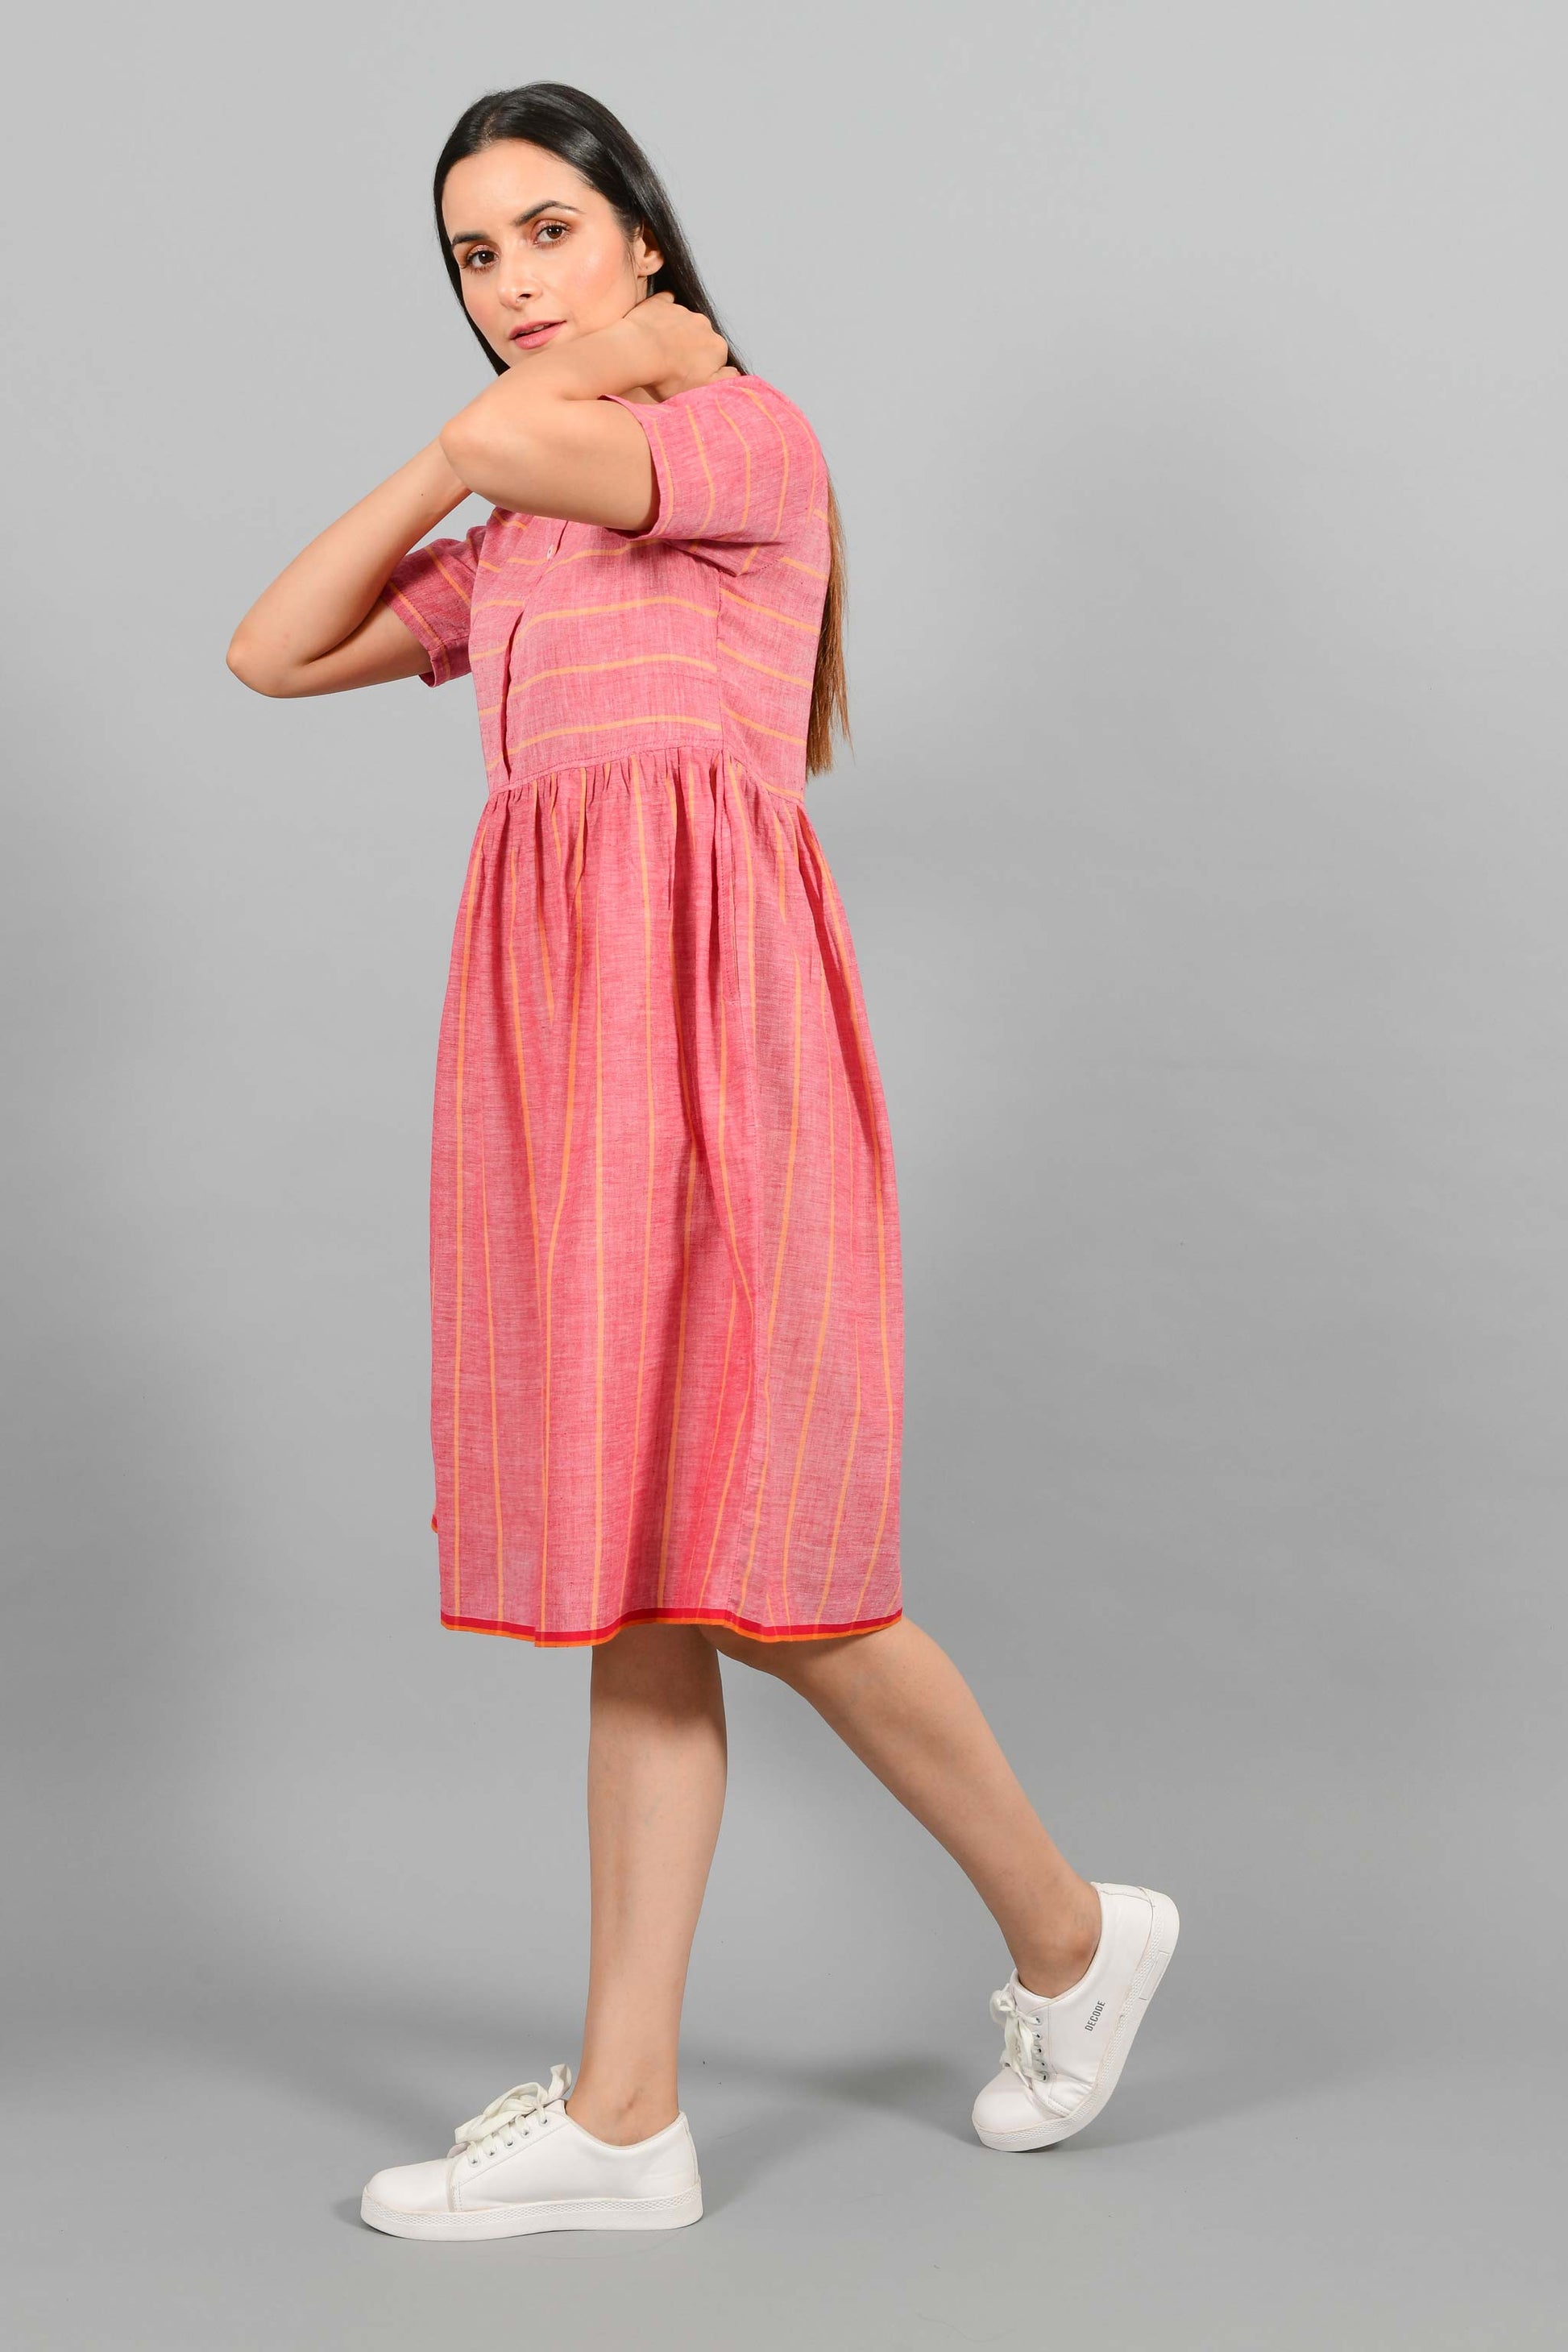 Side walking pose of an Indian female womenswear fashion model in a red chambray handspun and handwoven khadi cotton with orange stripes by Cotton Rack. The dress has front buttoned yoke and gathers at waist.